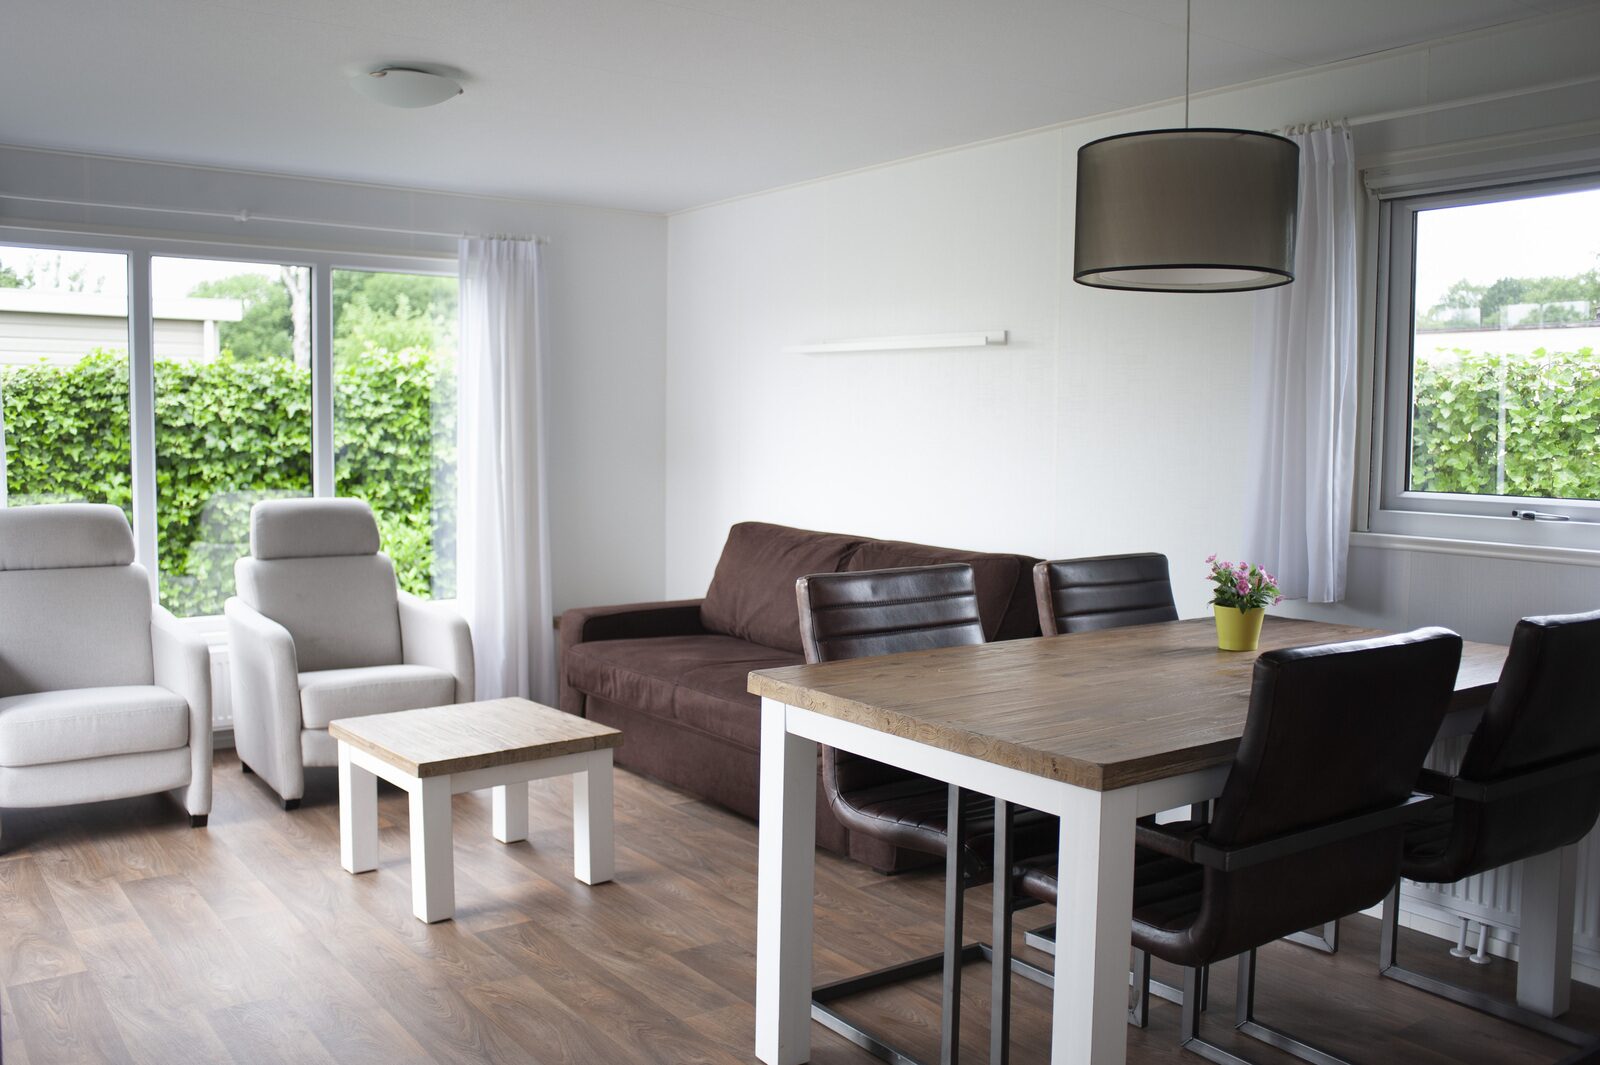 Veluwe lodge for four people (copy)